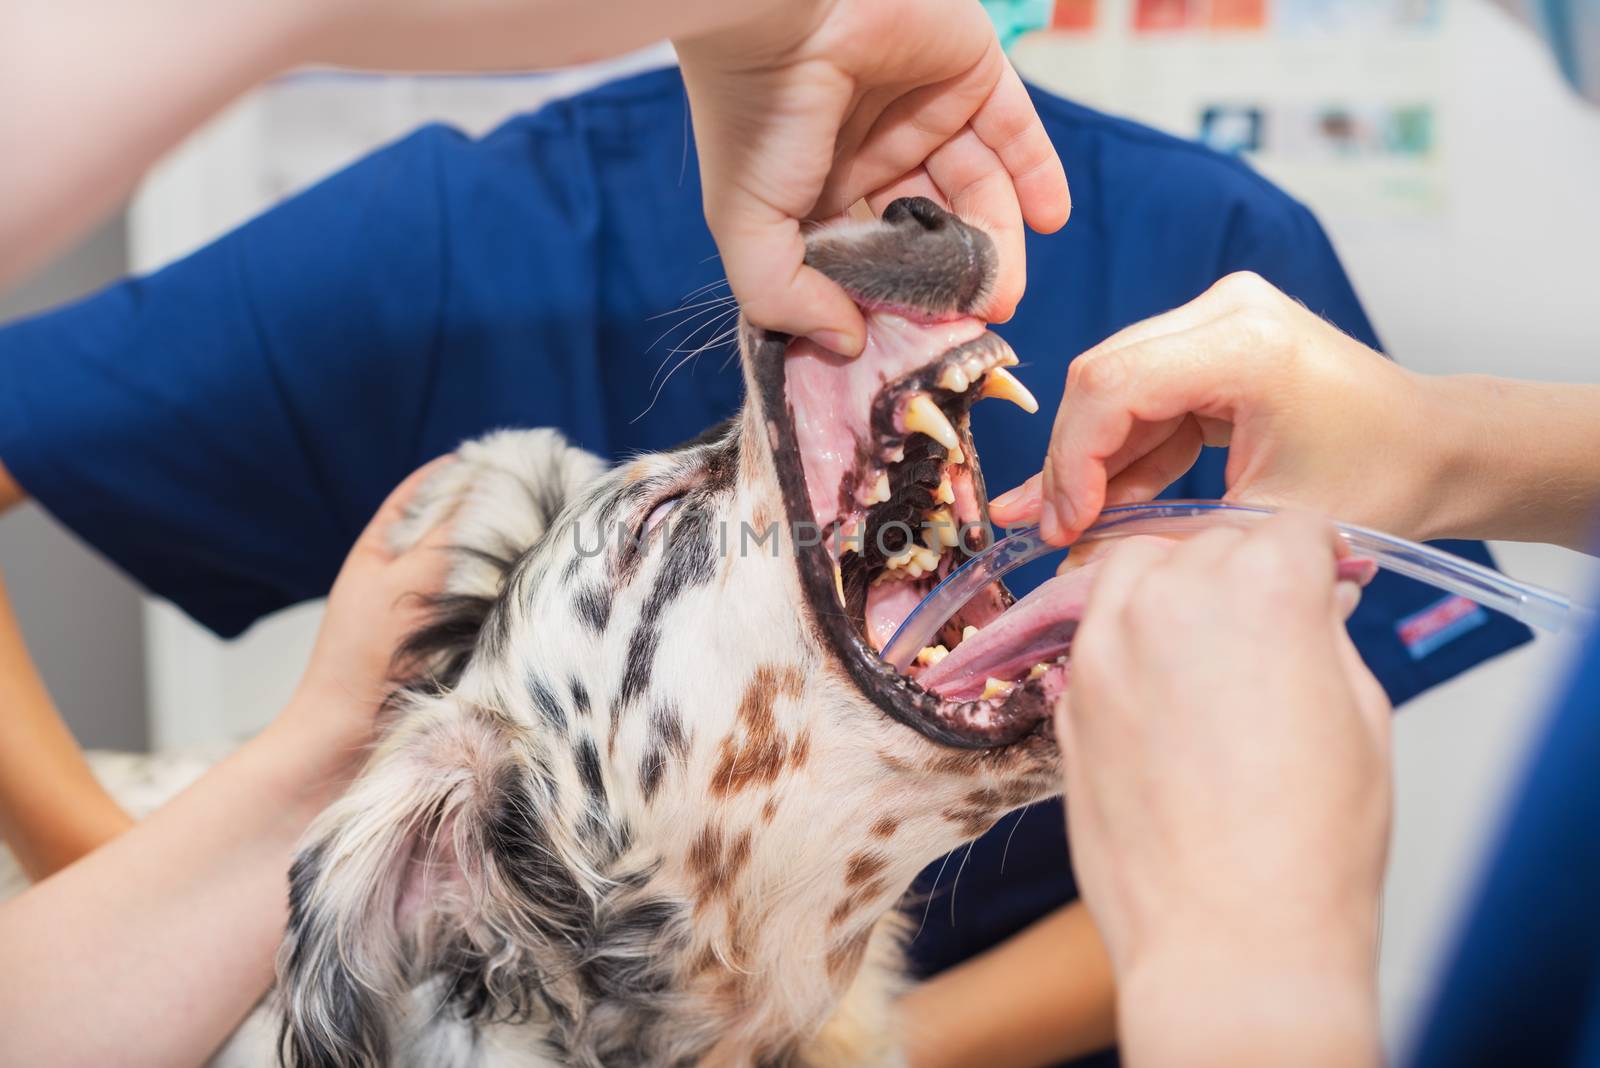 Dog intubated in surgery room of veterinary clinic by HERRAEZ